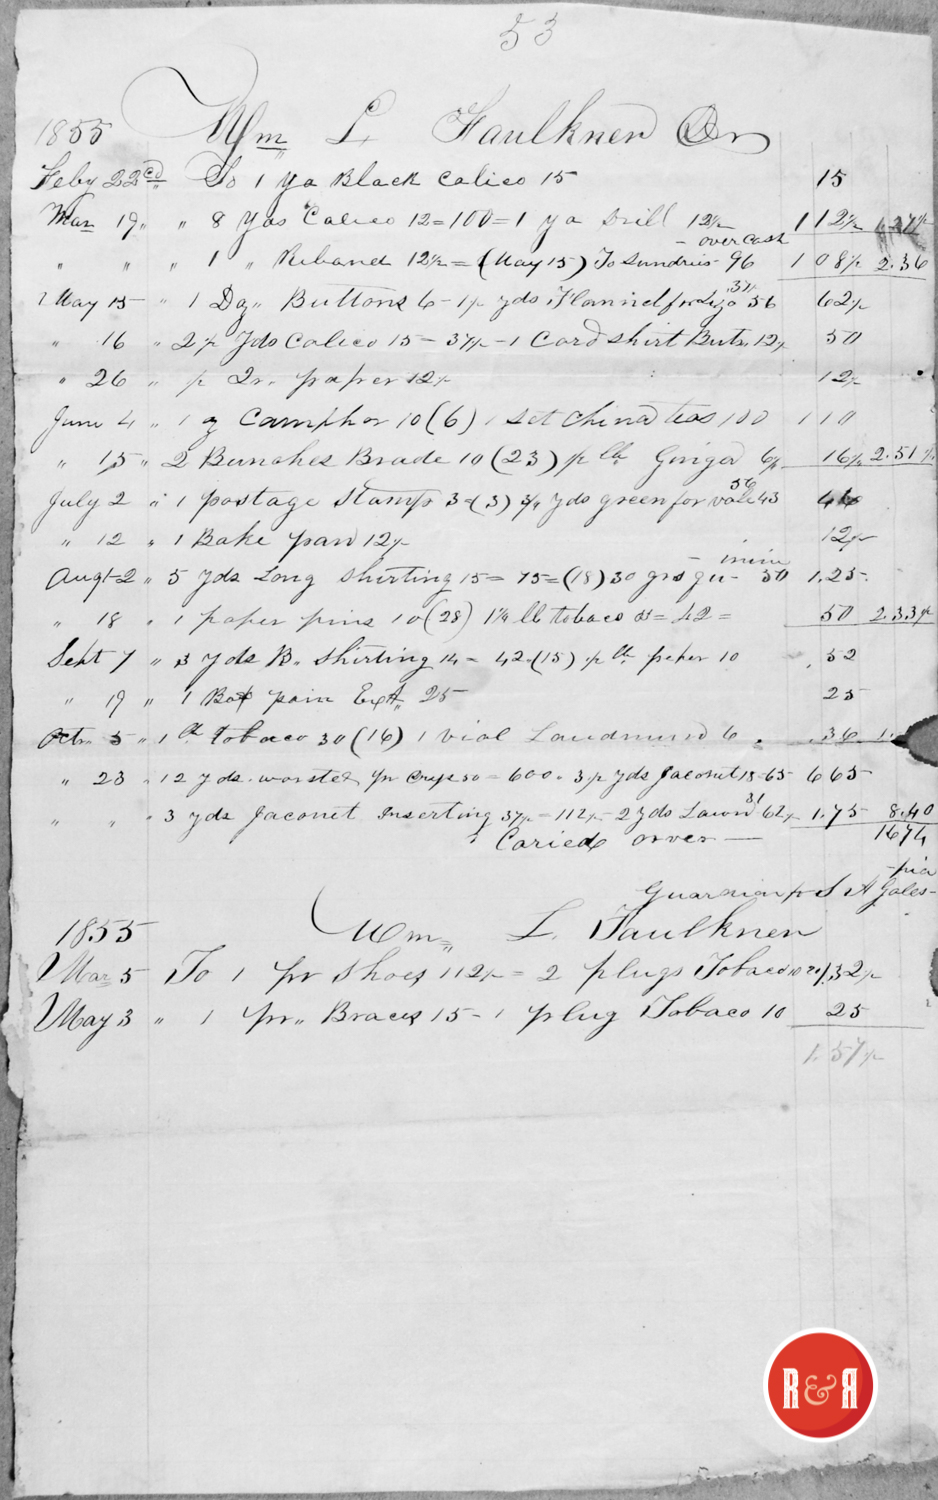 LEDGER FROM CRAIG AND TAYLOR - 1860, p. 5